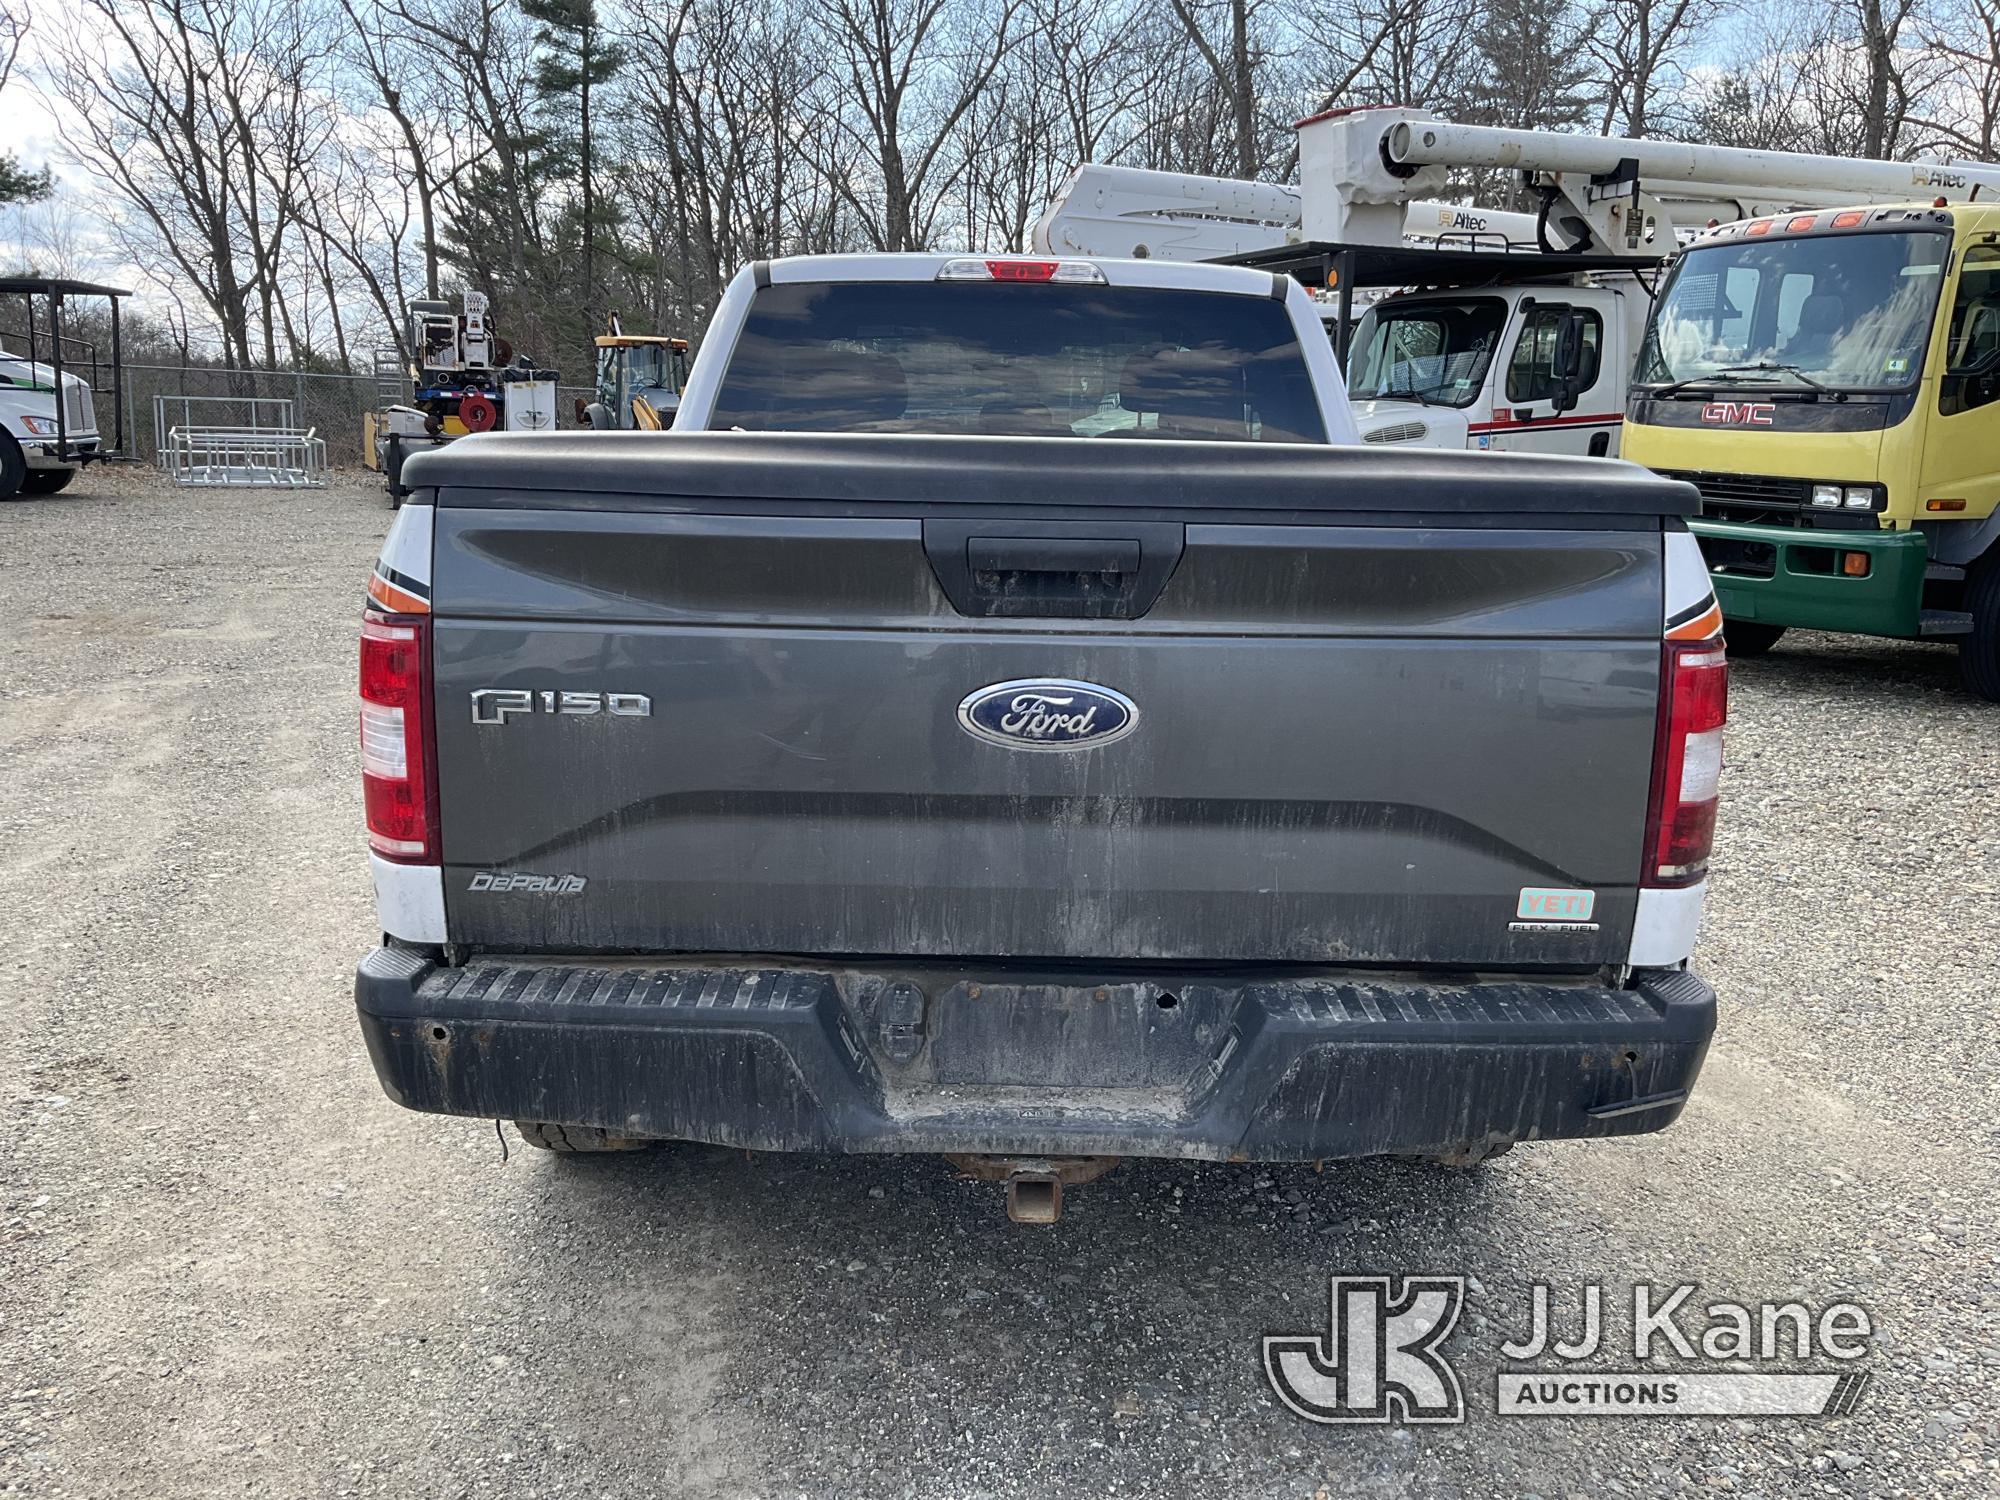 (Shrewsbury, MA) 2019 Ford F150 4x4 Extended-Cab Pickup Truck Runs & Struggles To Move When Transmis